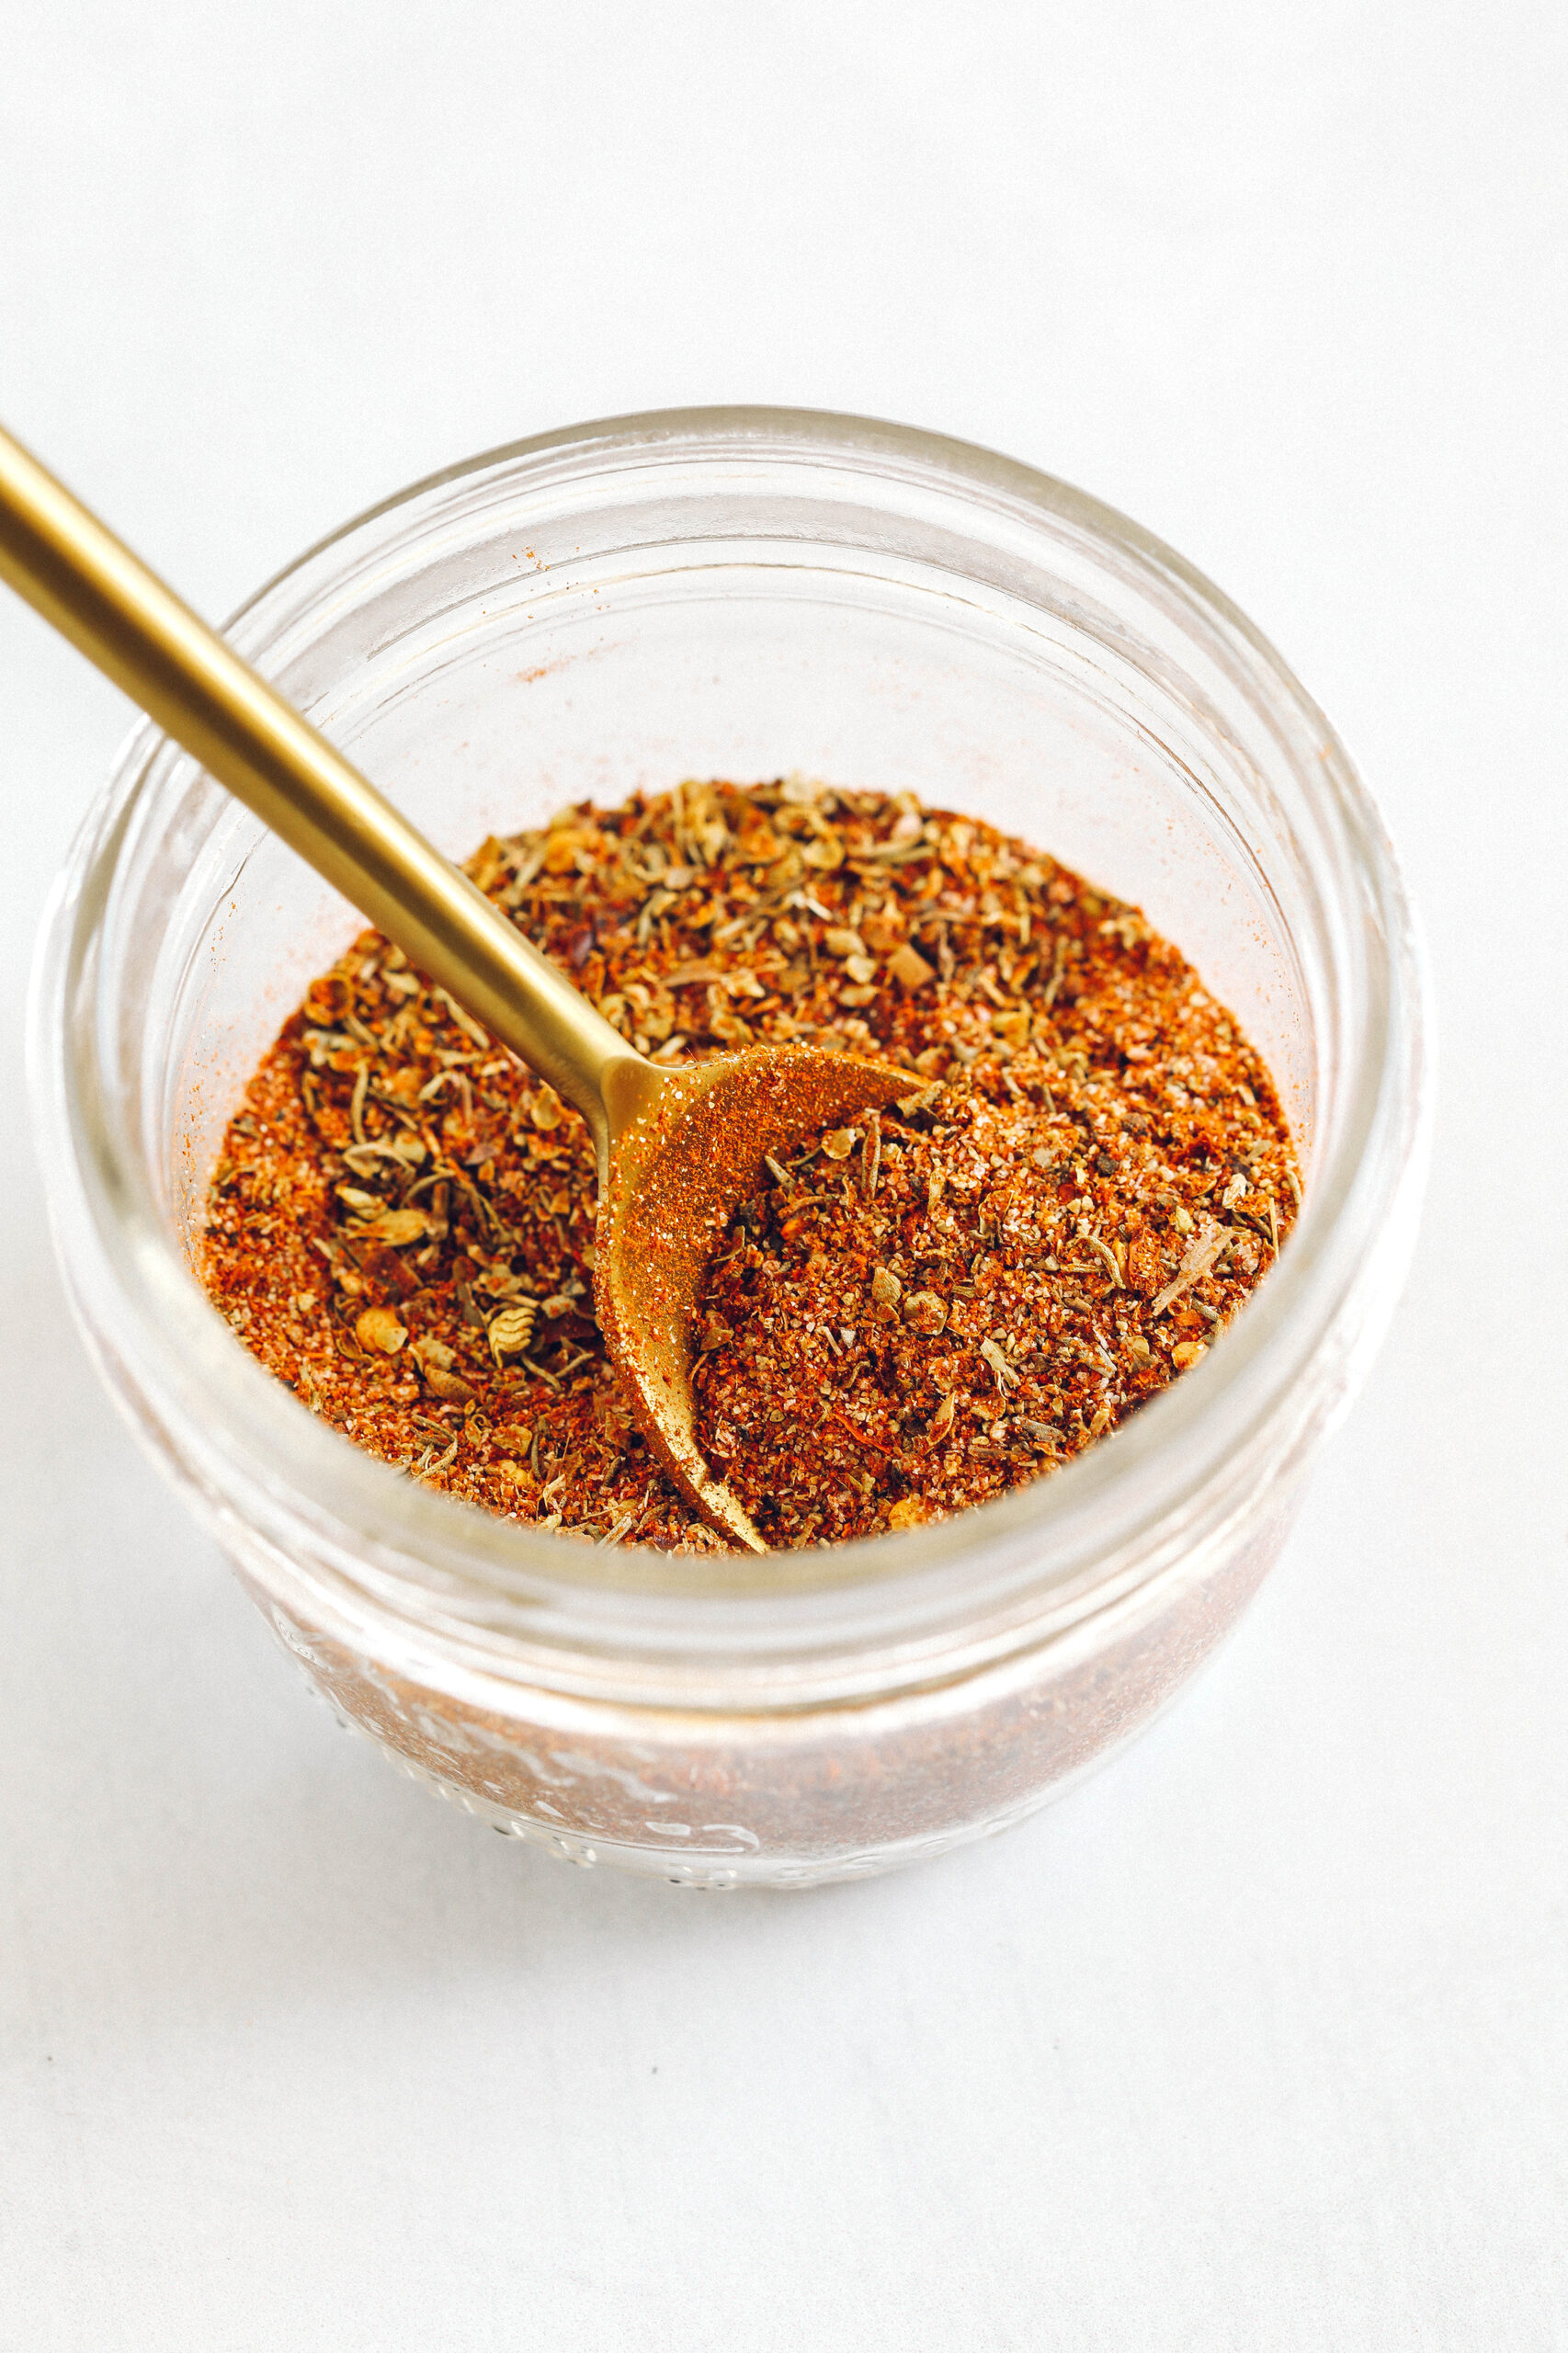 This is the only Homemade Cajun Seasoning you’ll ever need that is easy to make with the perfect amount of zest and spice to add a delicious kick to any dish!